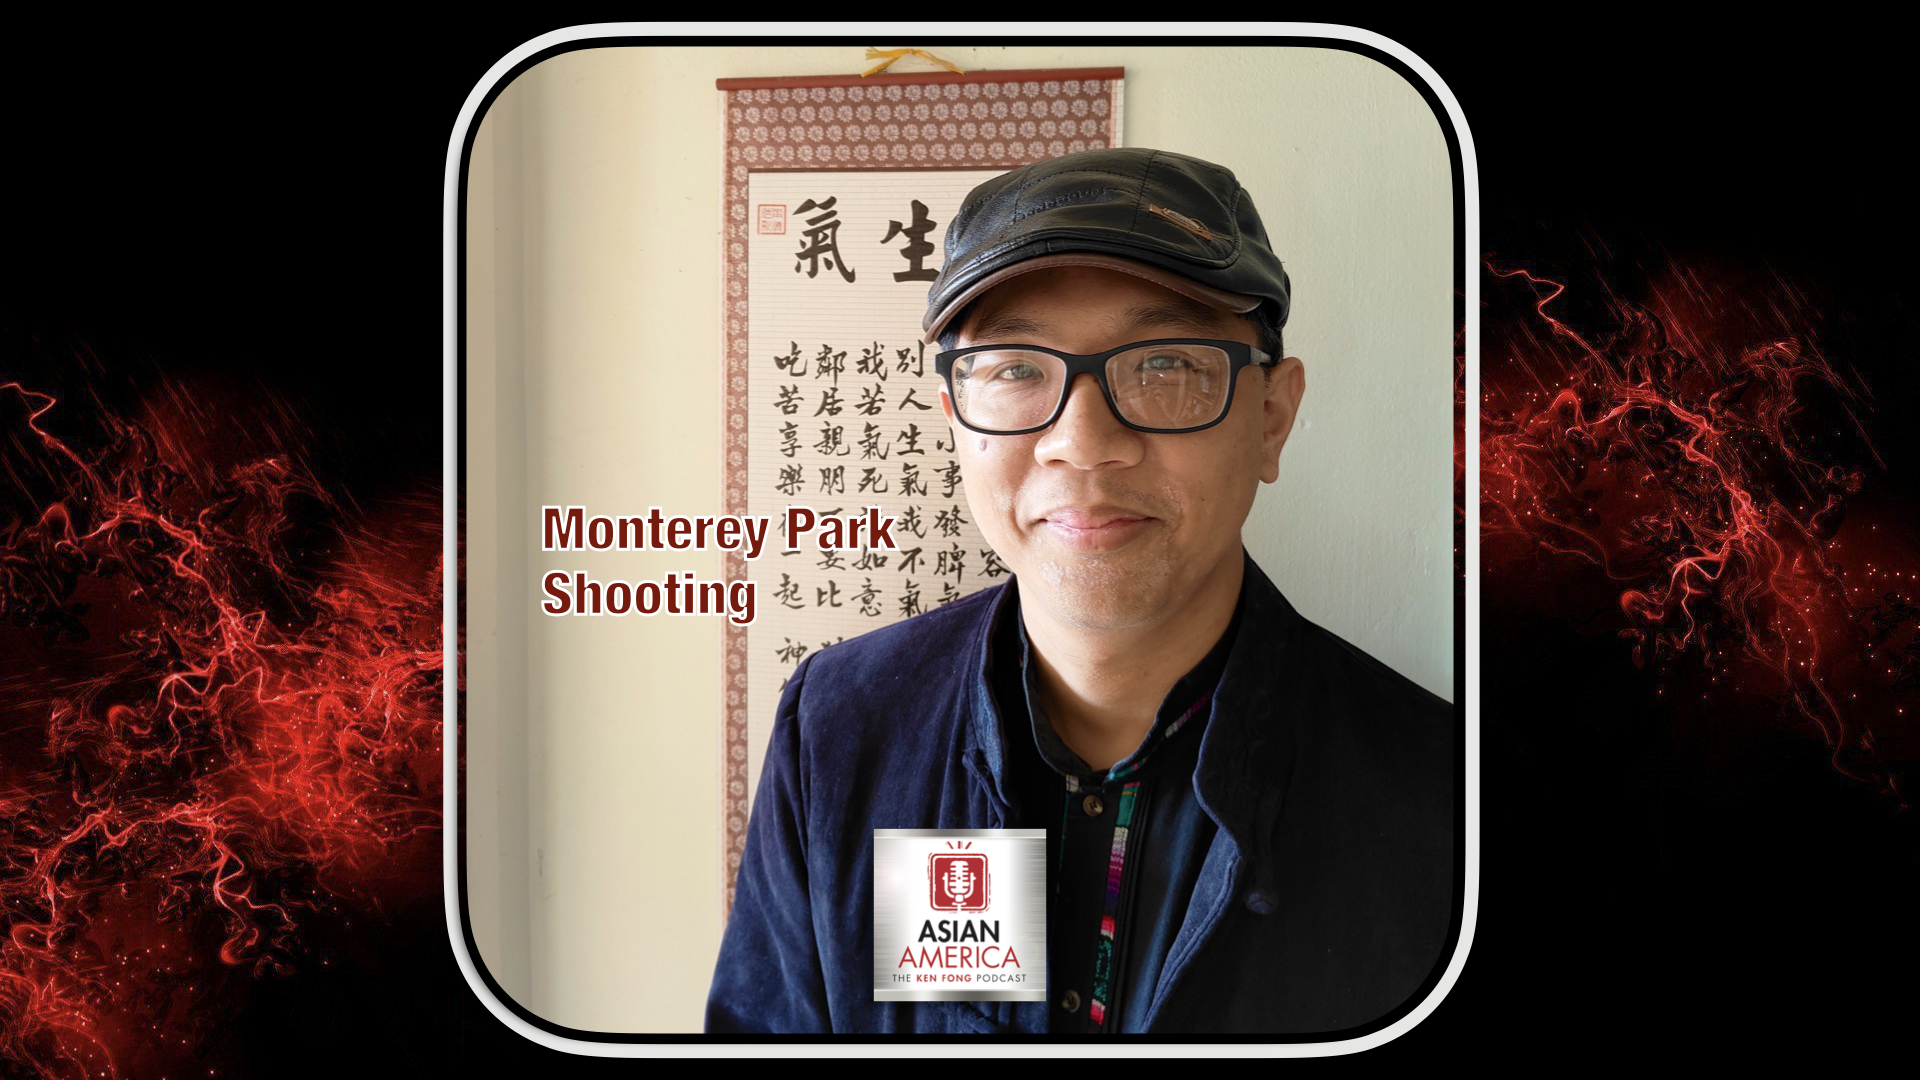 Ep 410: Eric Chen On Caring Now For The Victims Of The Monterey Park Shooting